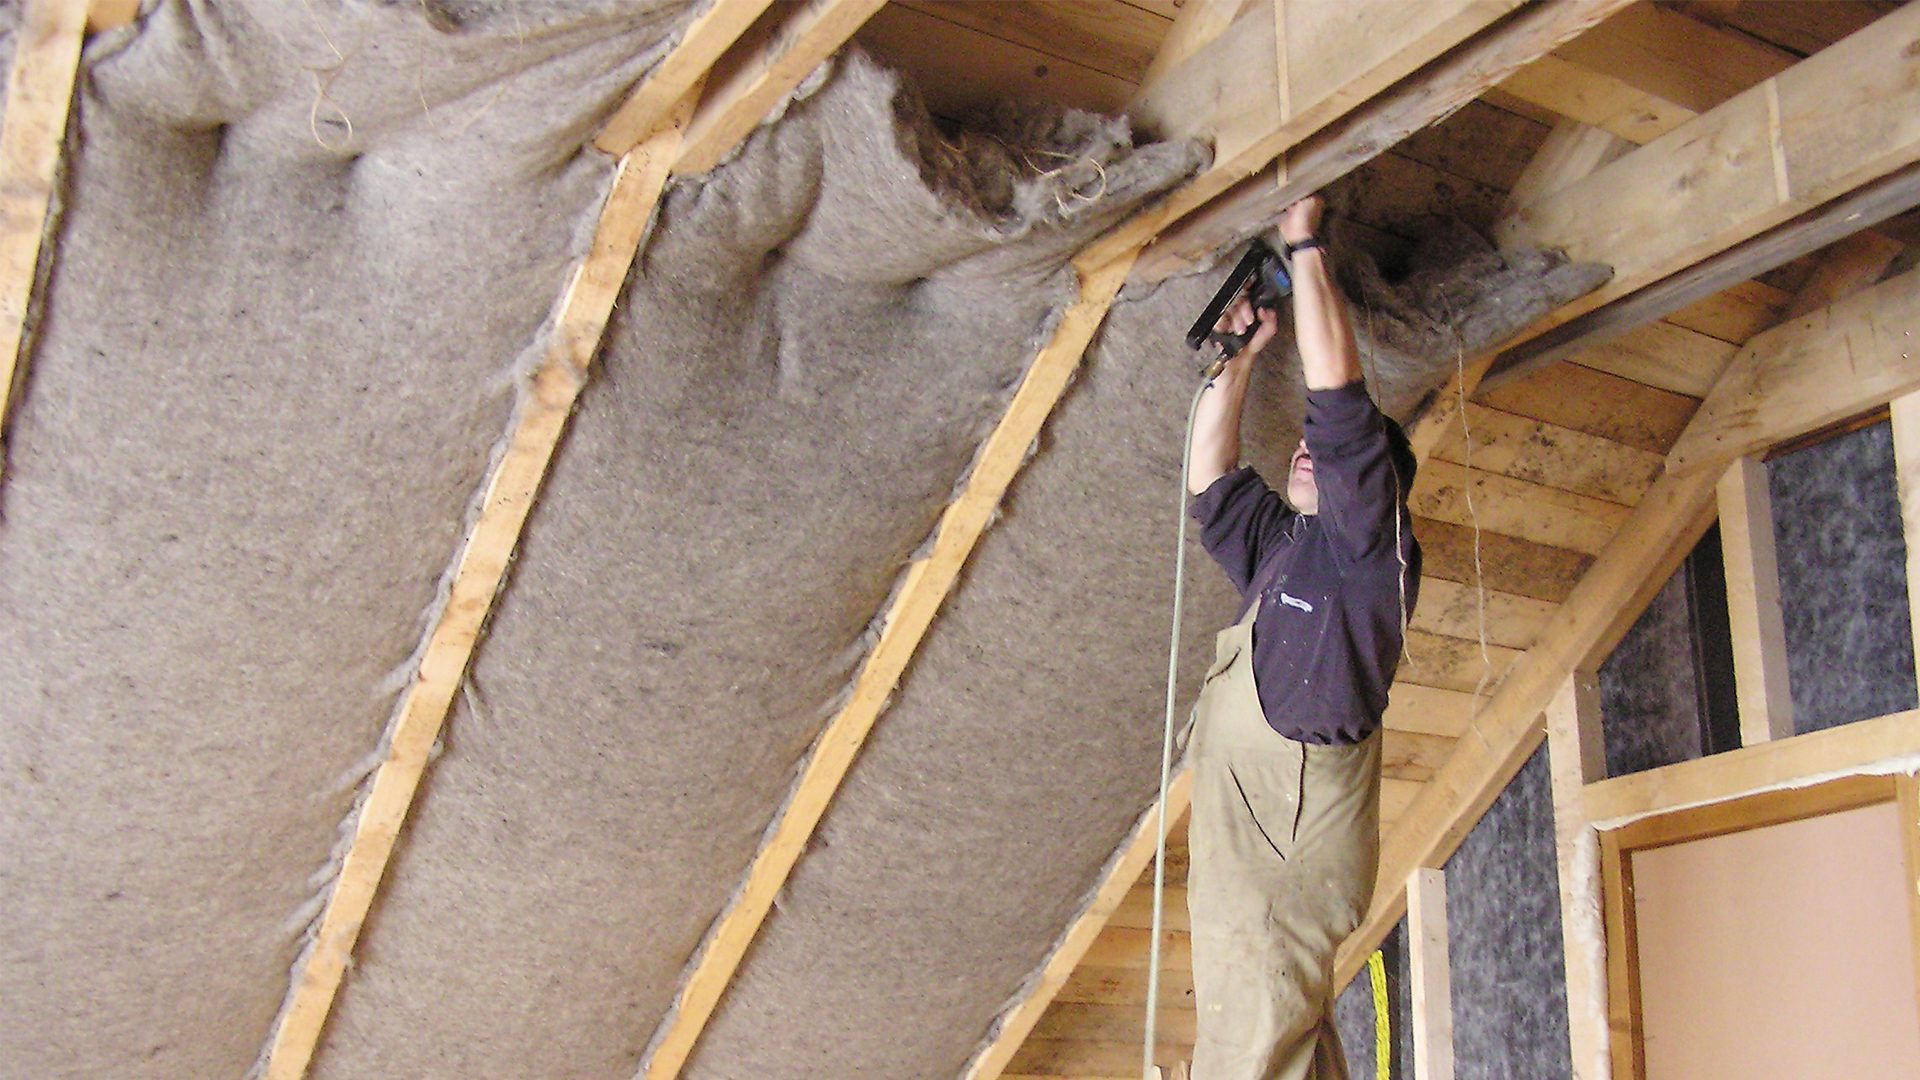 Installing sheep wool insulation in homes